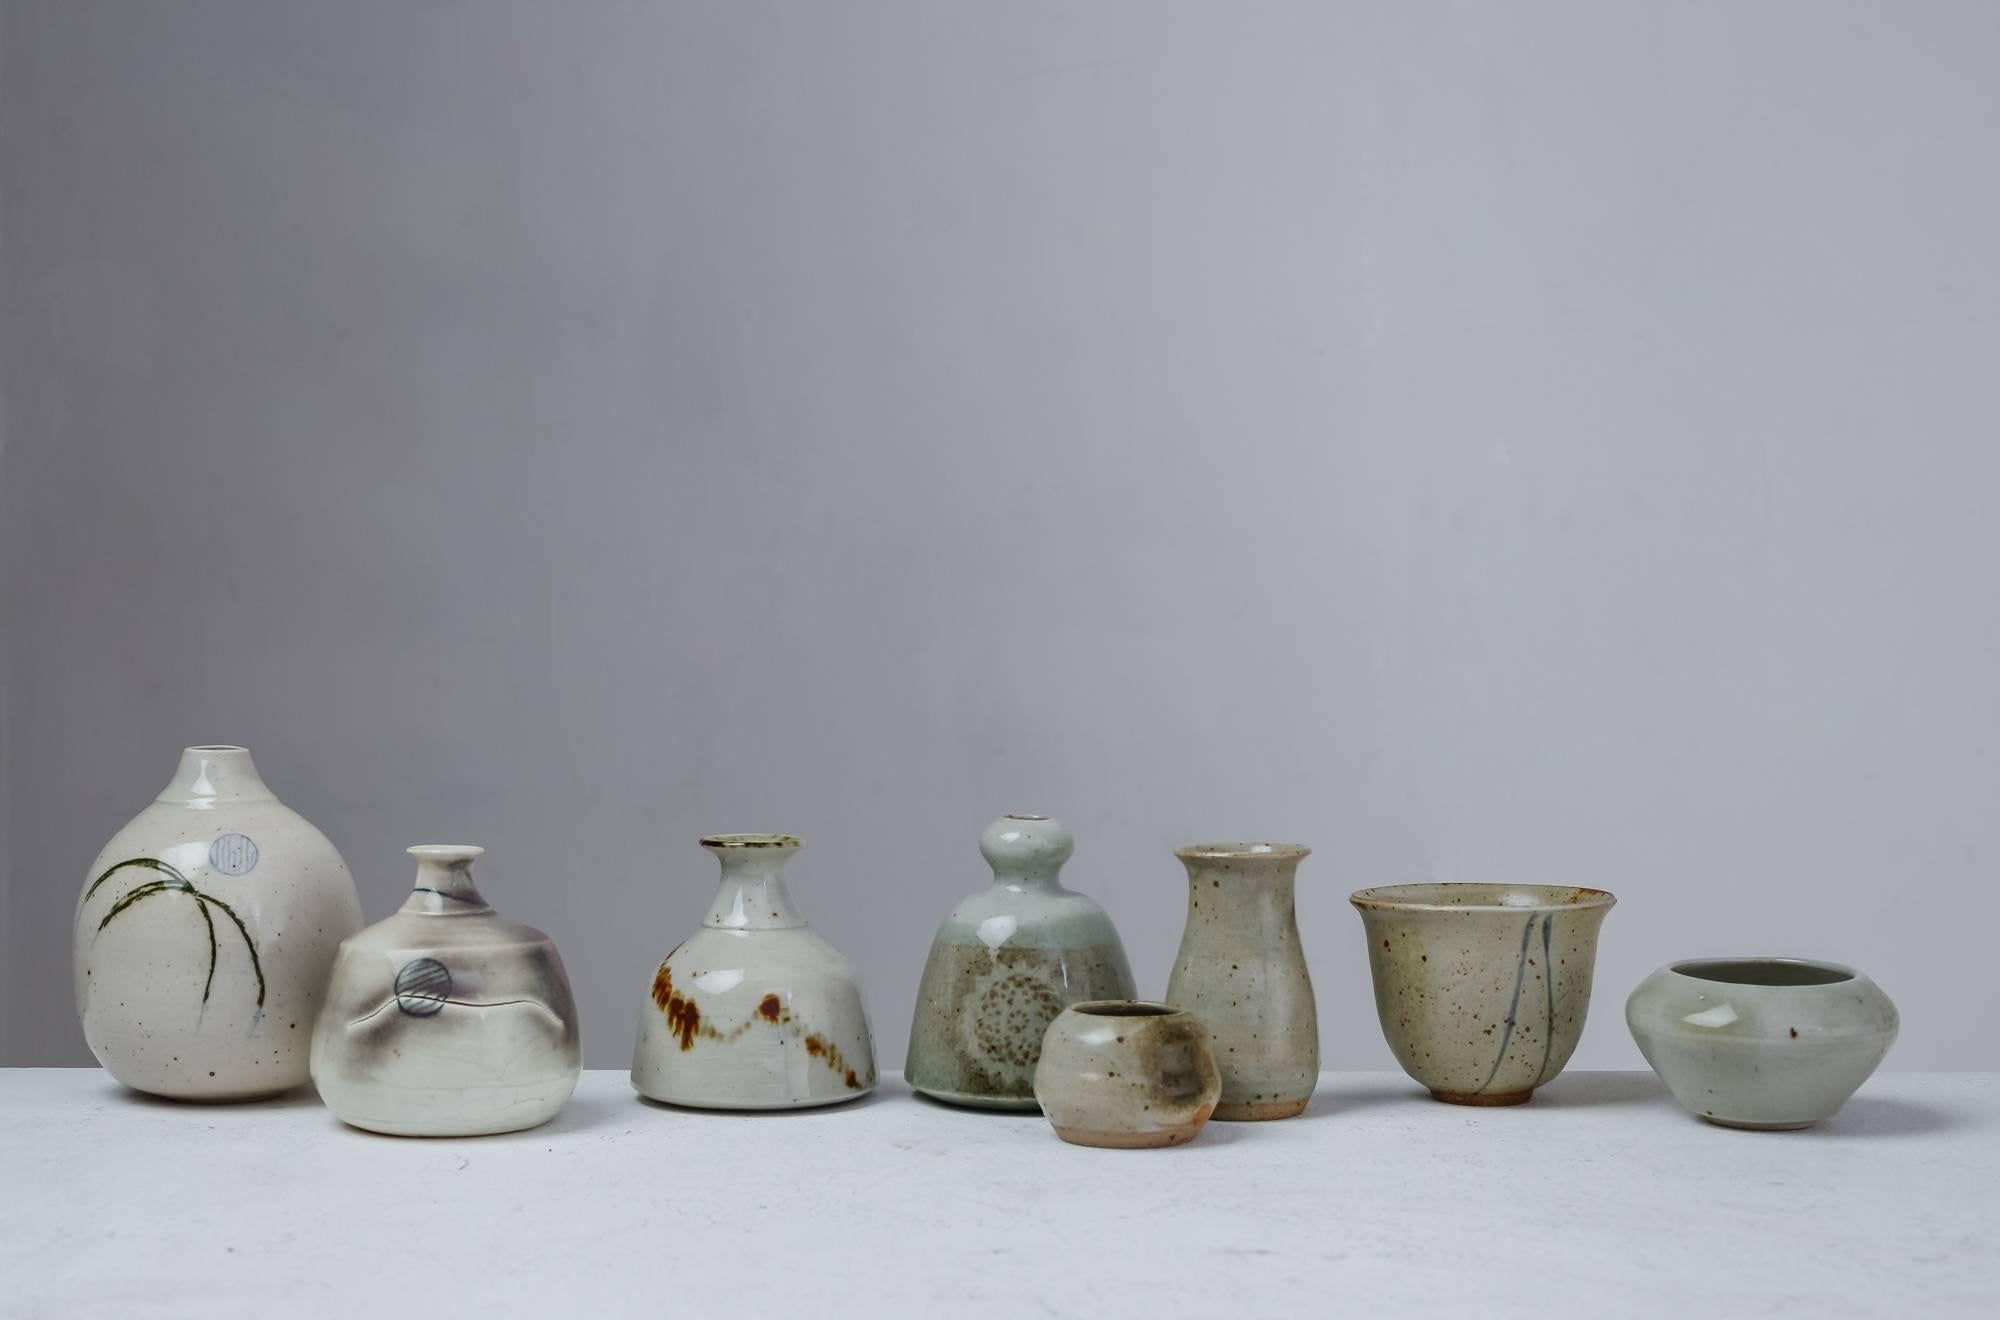 A set of eight vases and bowls with a mostly grey glaze finish, by French ceramist Franco Agnese. 
The lowest piece is 4.5 cm (1.8 inch) high and has a 6 cm (2.4 inch) diameter. The tallest vase is 13 cm (5.1 inch) high with a 10 cm (3.9 inch)